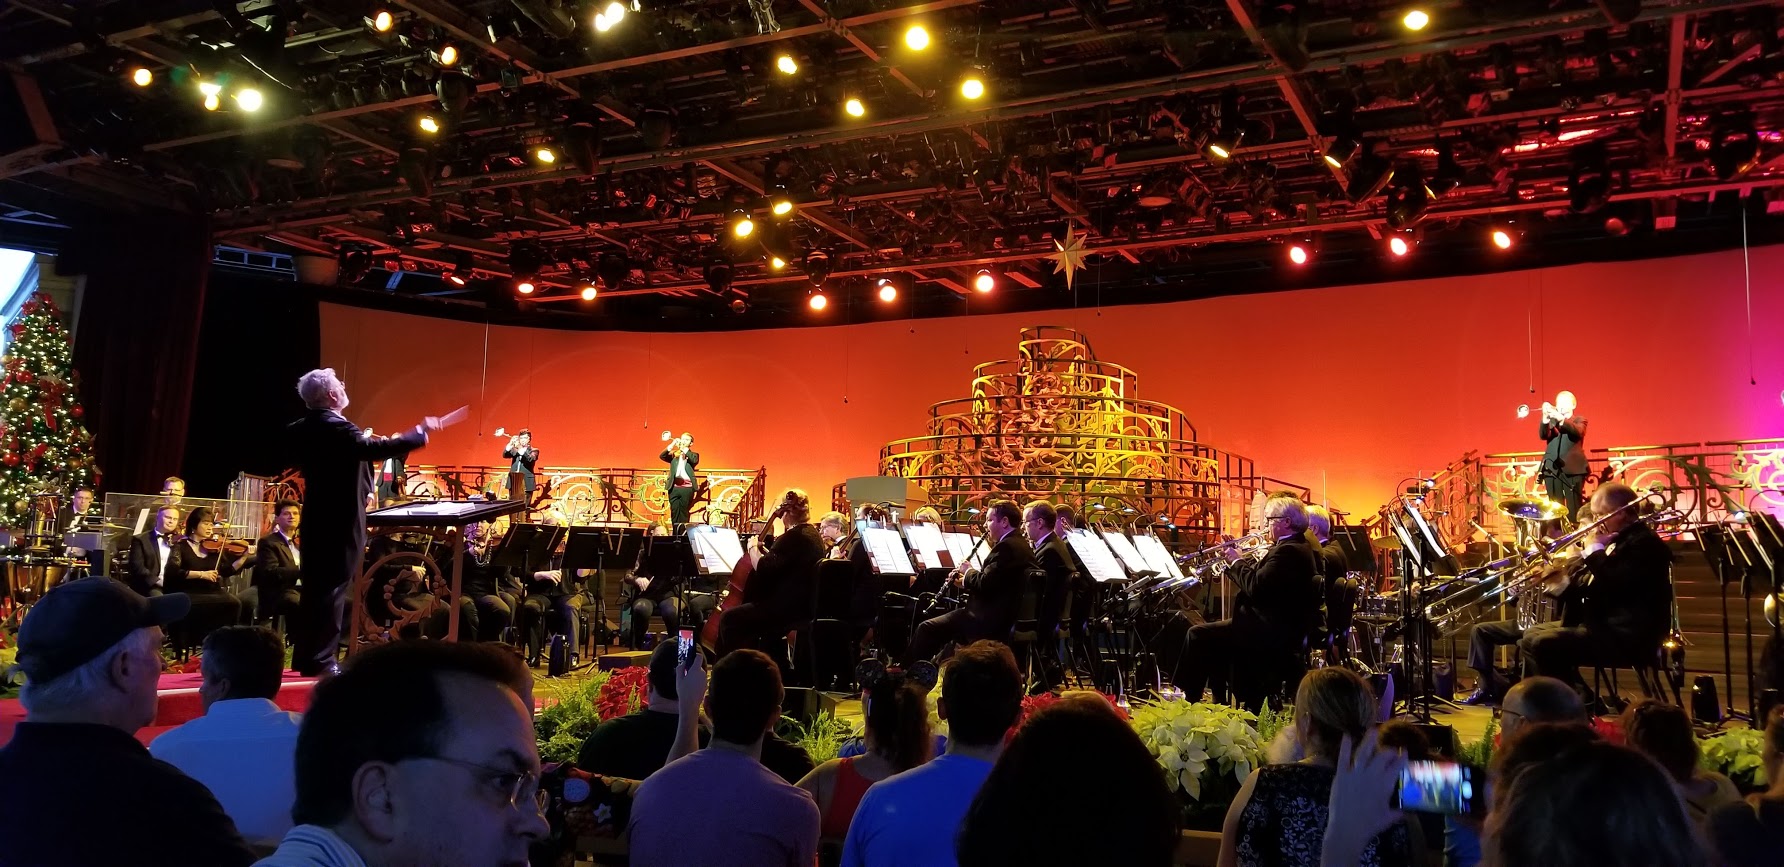 See the The Candlelight Processional with Neil Patrick Harris Live on December 3rd